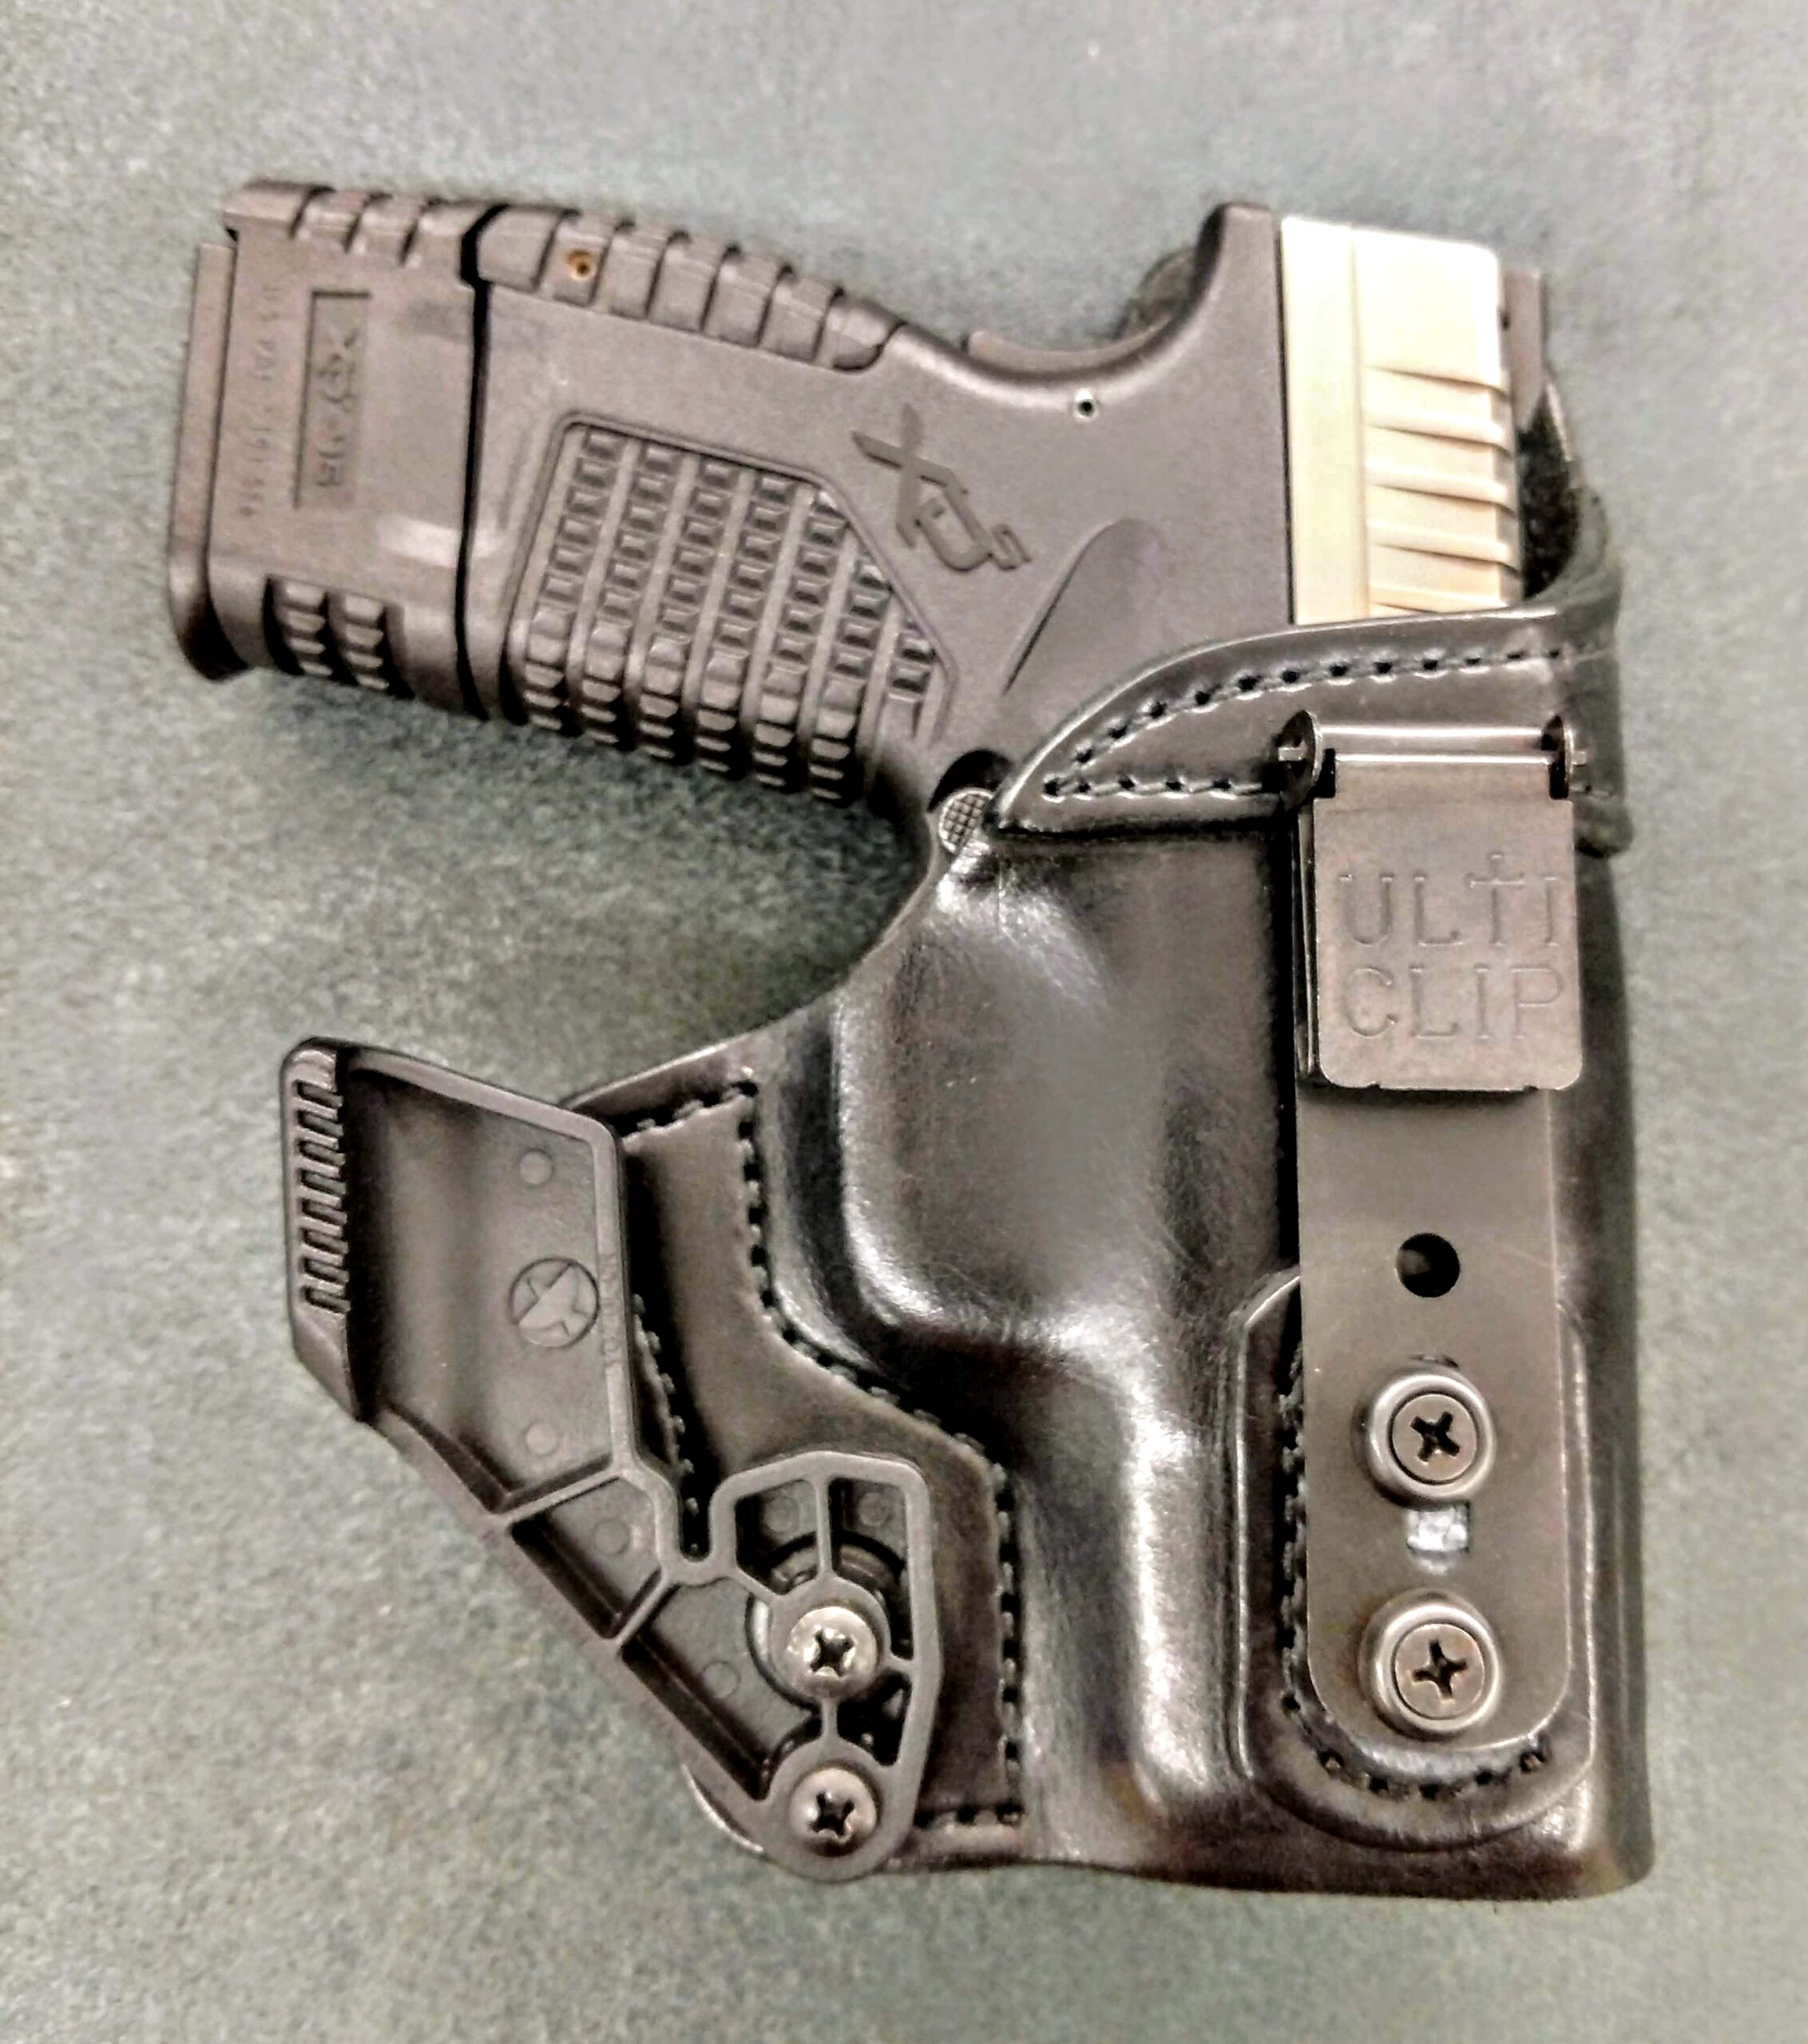 LC9 LC9S EC9S LC380 Ruger with Optics Laser Inside Waistband Holster  Concealed Carry with Claw